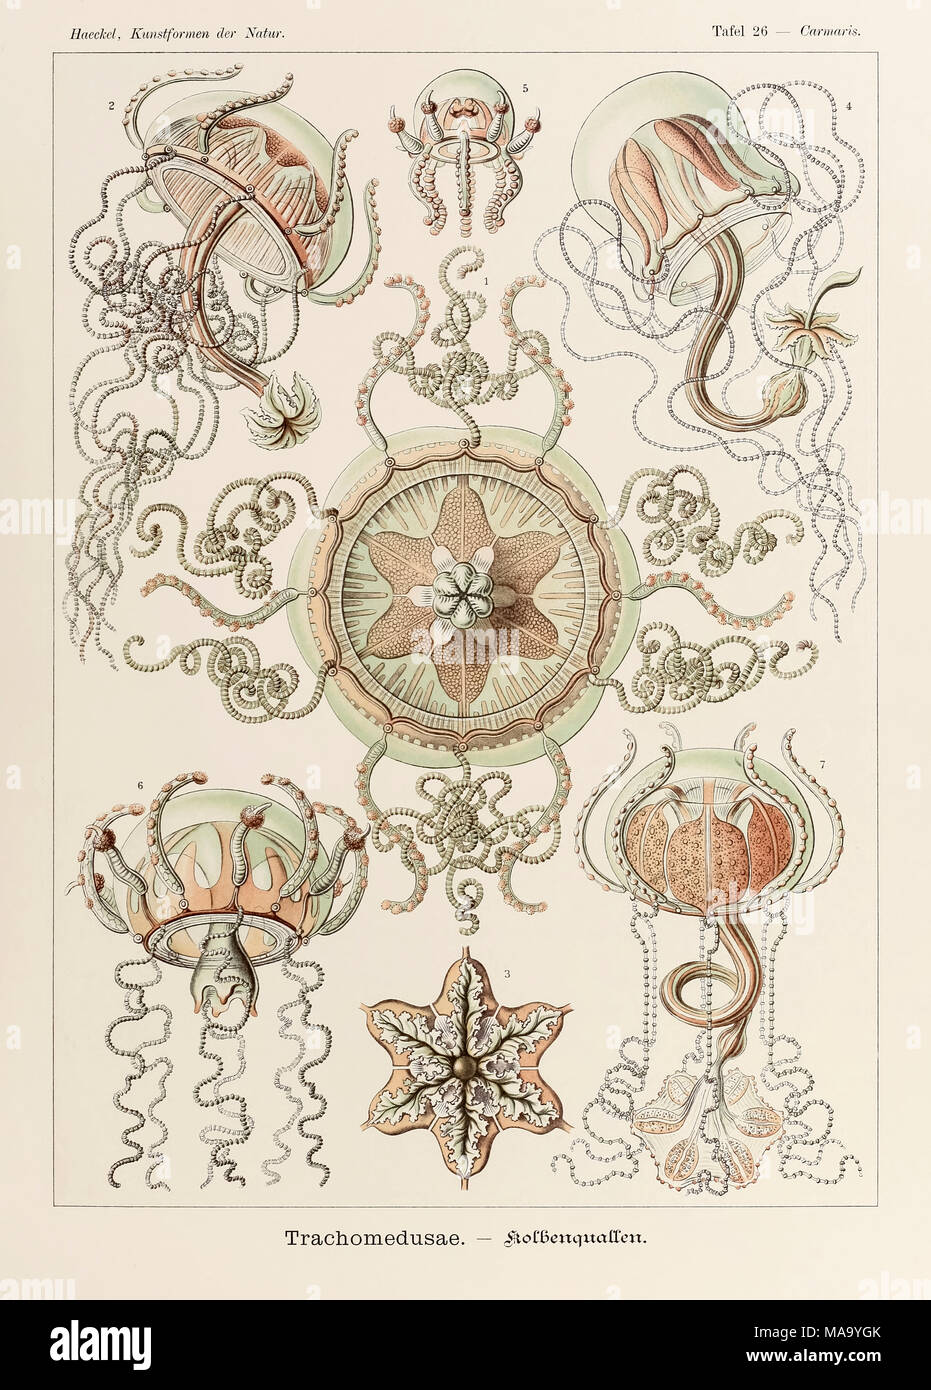 Plate 26 Carmaris Trachomedusae from ‘Kunstformen der Natur’ (Art Forms in Nature) illustrated by Ernst Haeckel (1834-1919). See more information below. Stock Photo